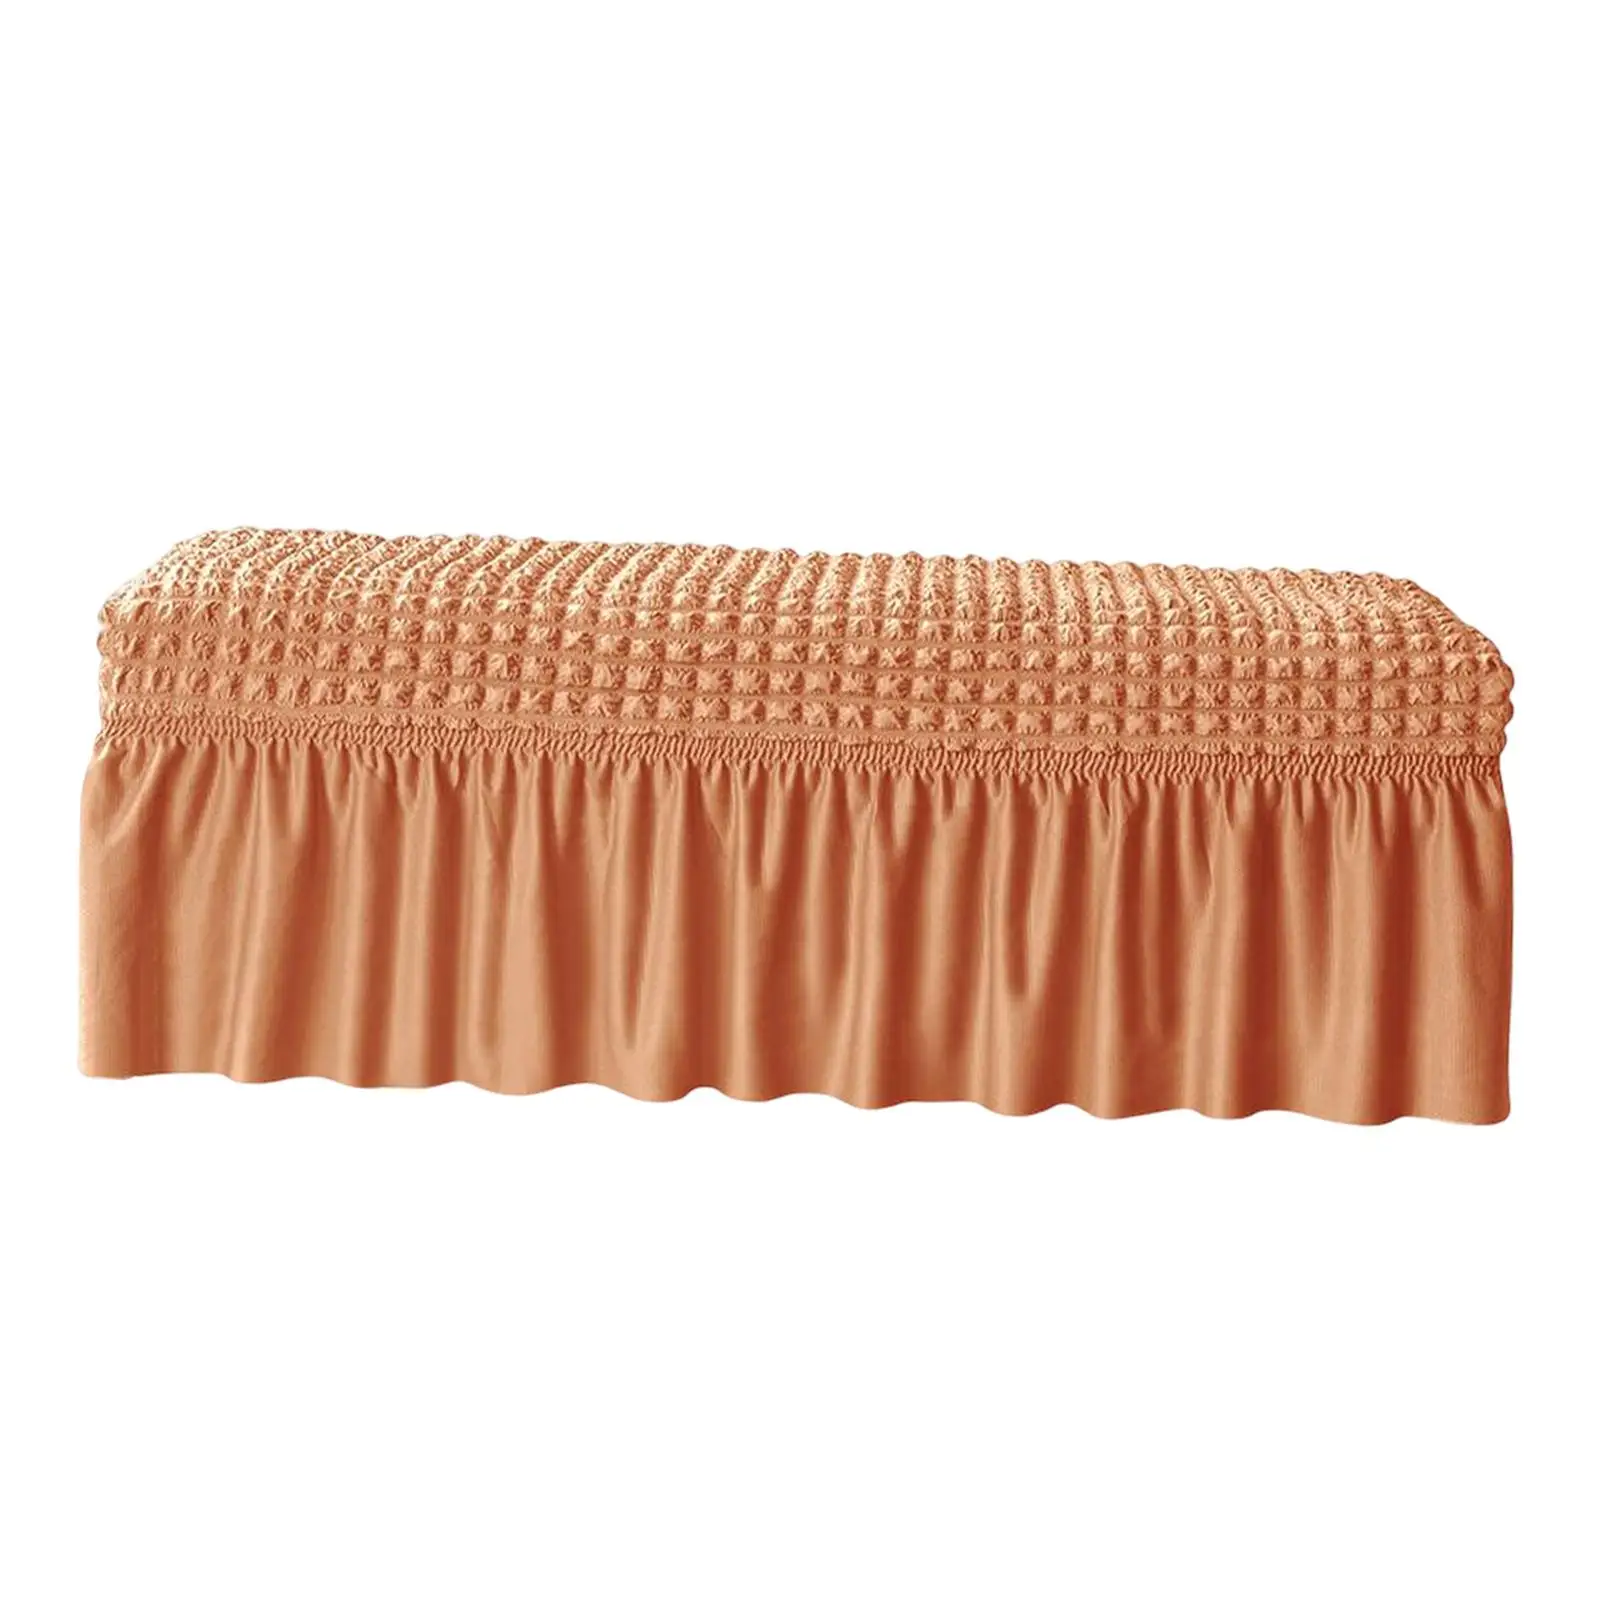 Dining Bench Cover Bench Seat Furniture Protector Soft Washable Dining Bench Protector for Bedroom Restaurant Living Room Hotel